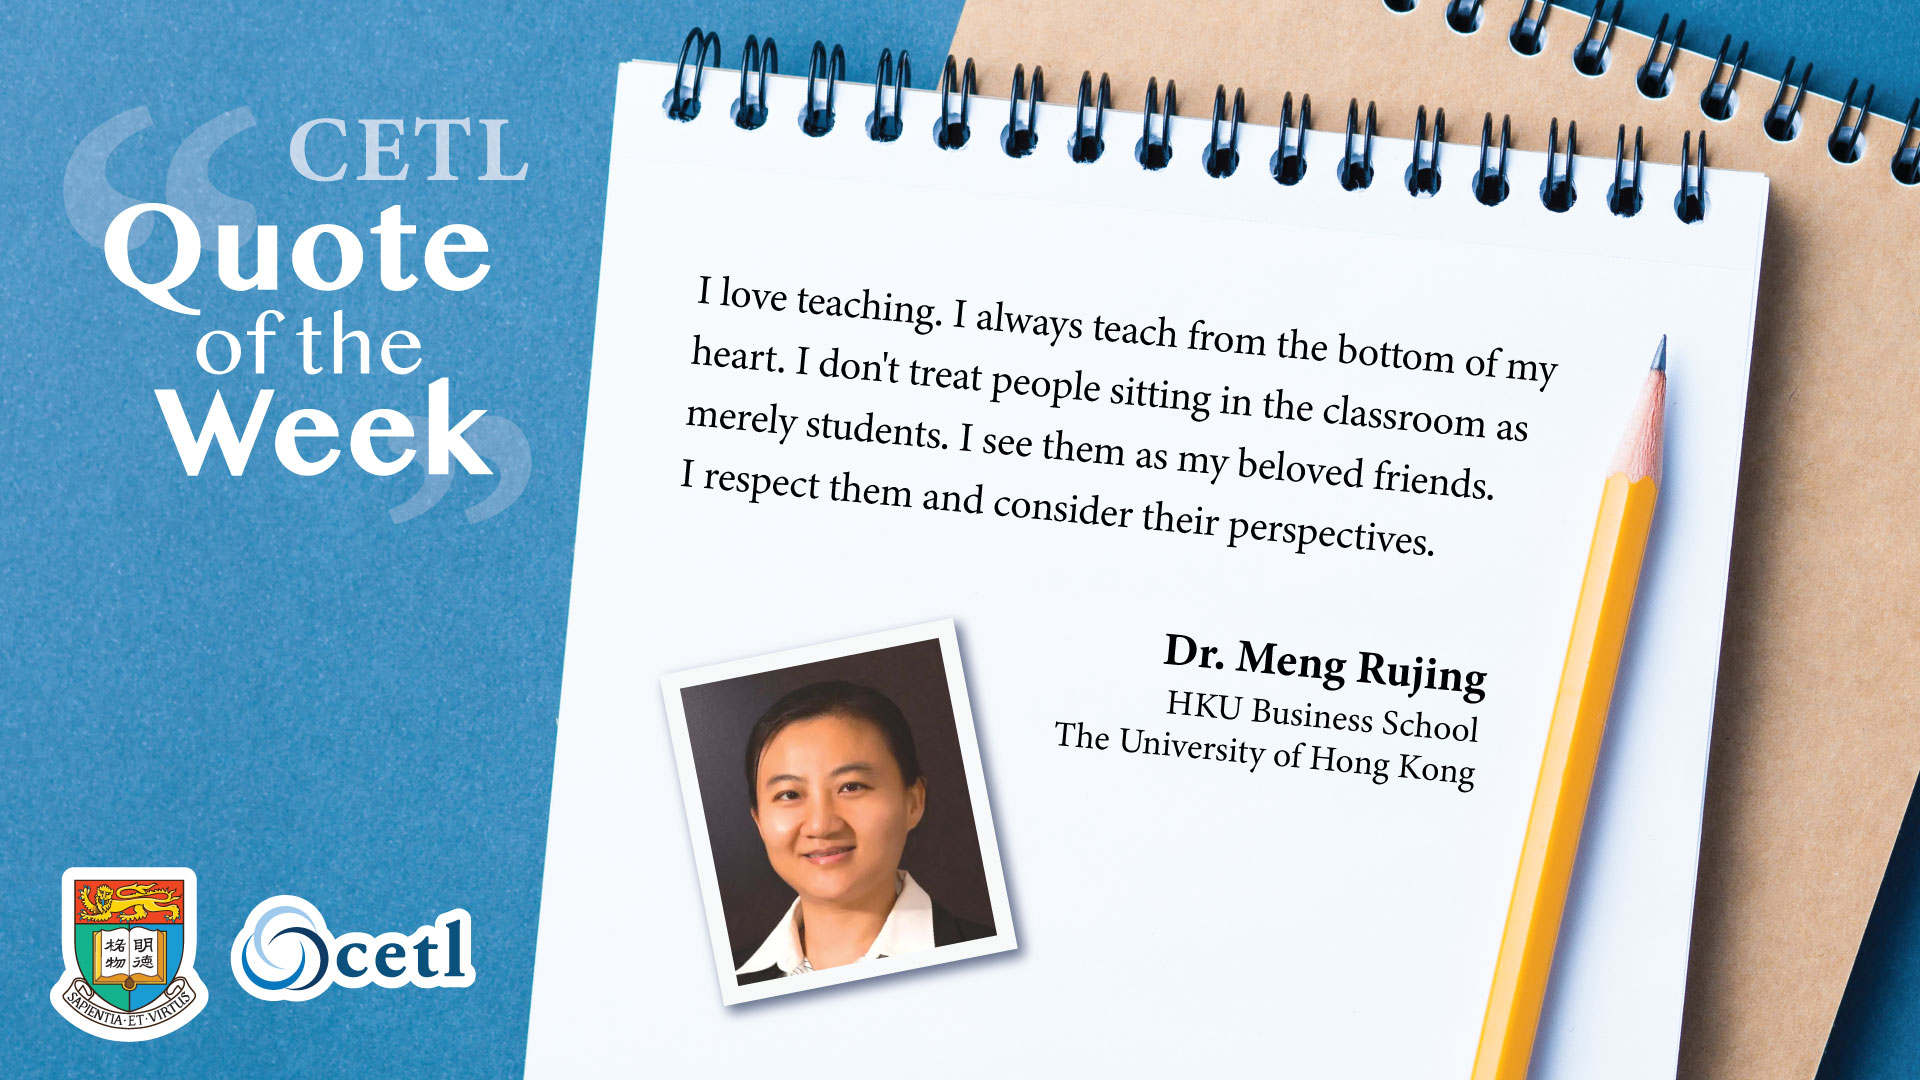 Dr. Meng Rujing - I love teaching. I always teach from the bottom of my heart. I don't treat people sitting in the classroom as merely students. I see them as my beloved friends. I respect them and consider their perspectives.